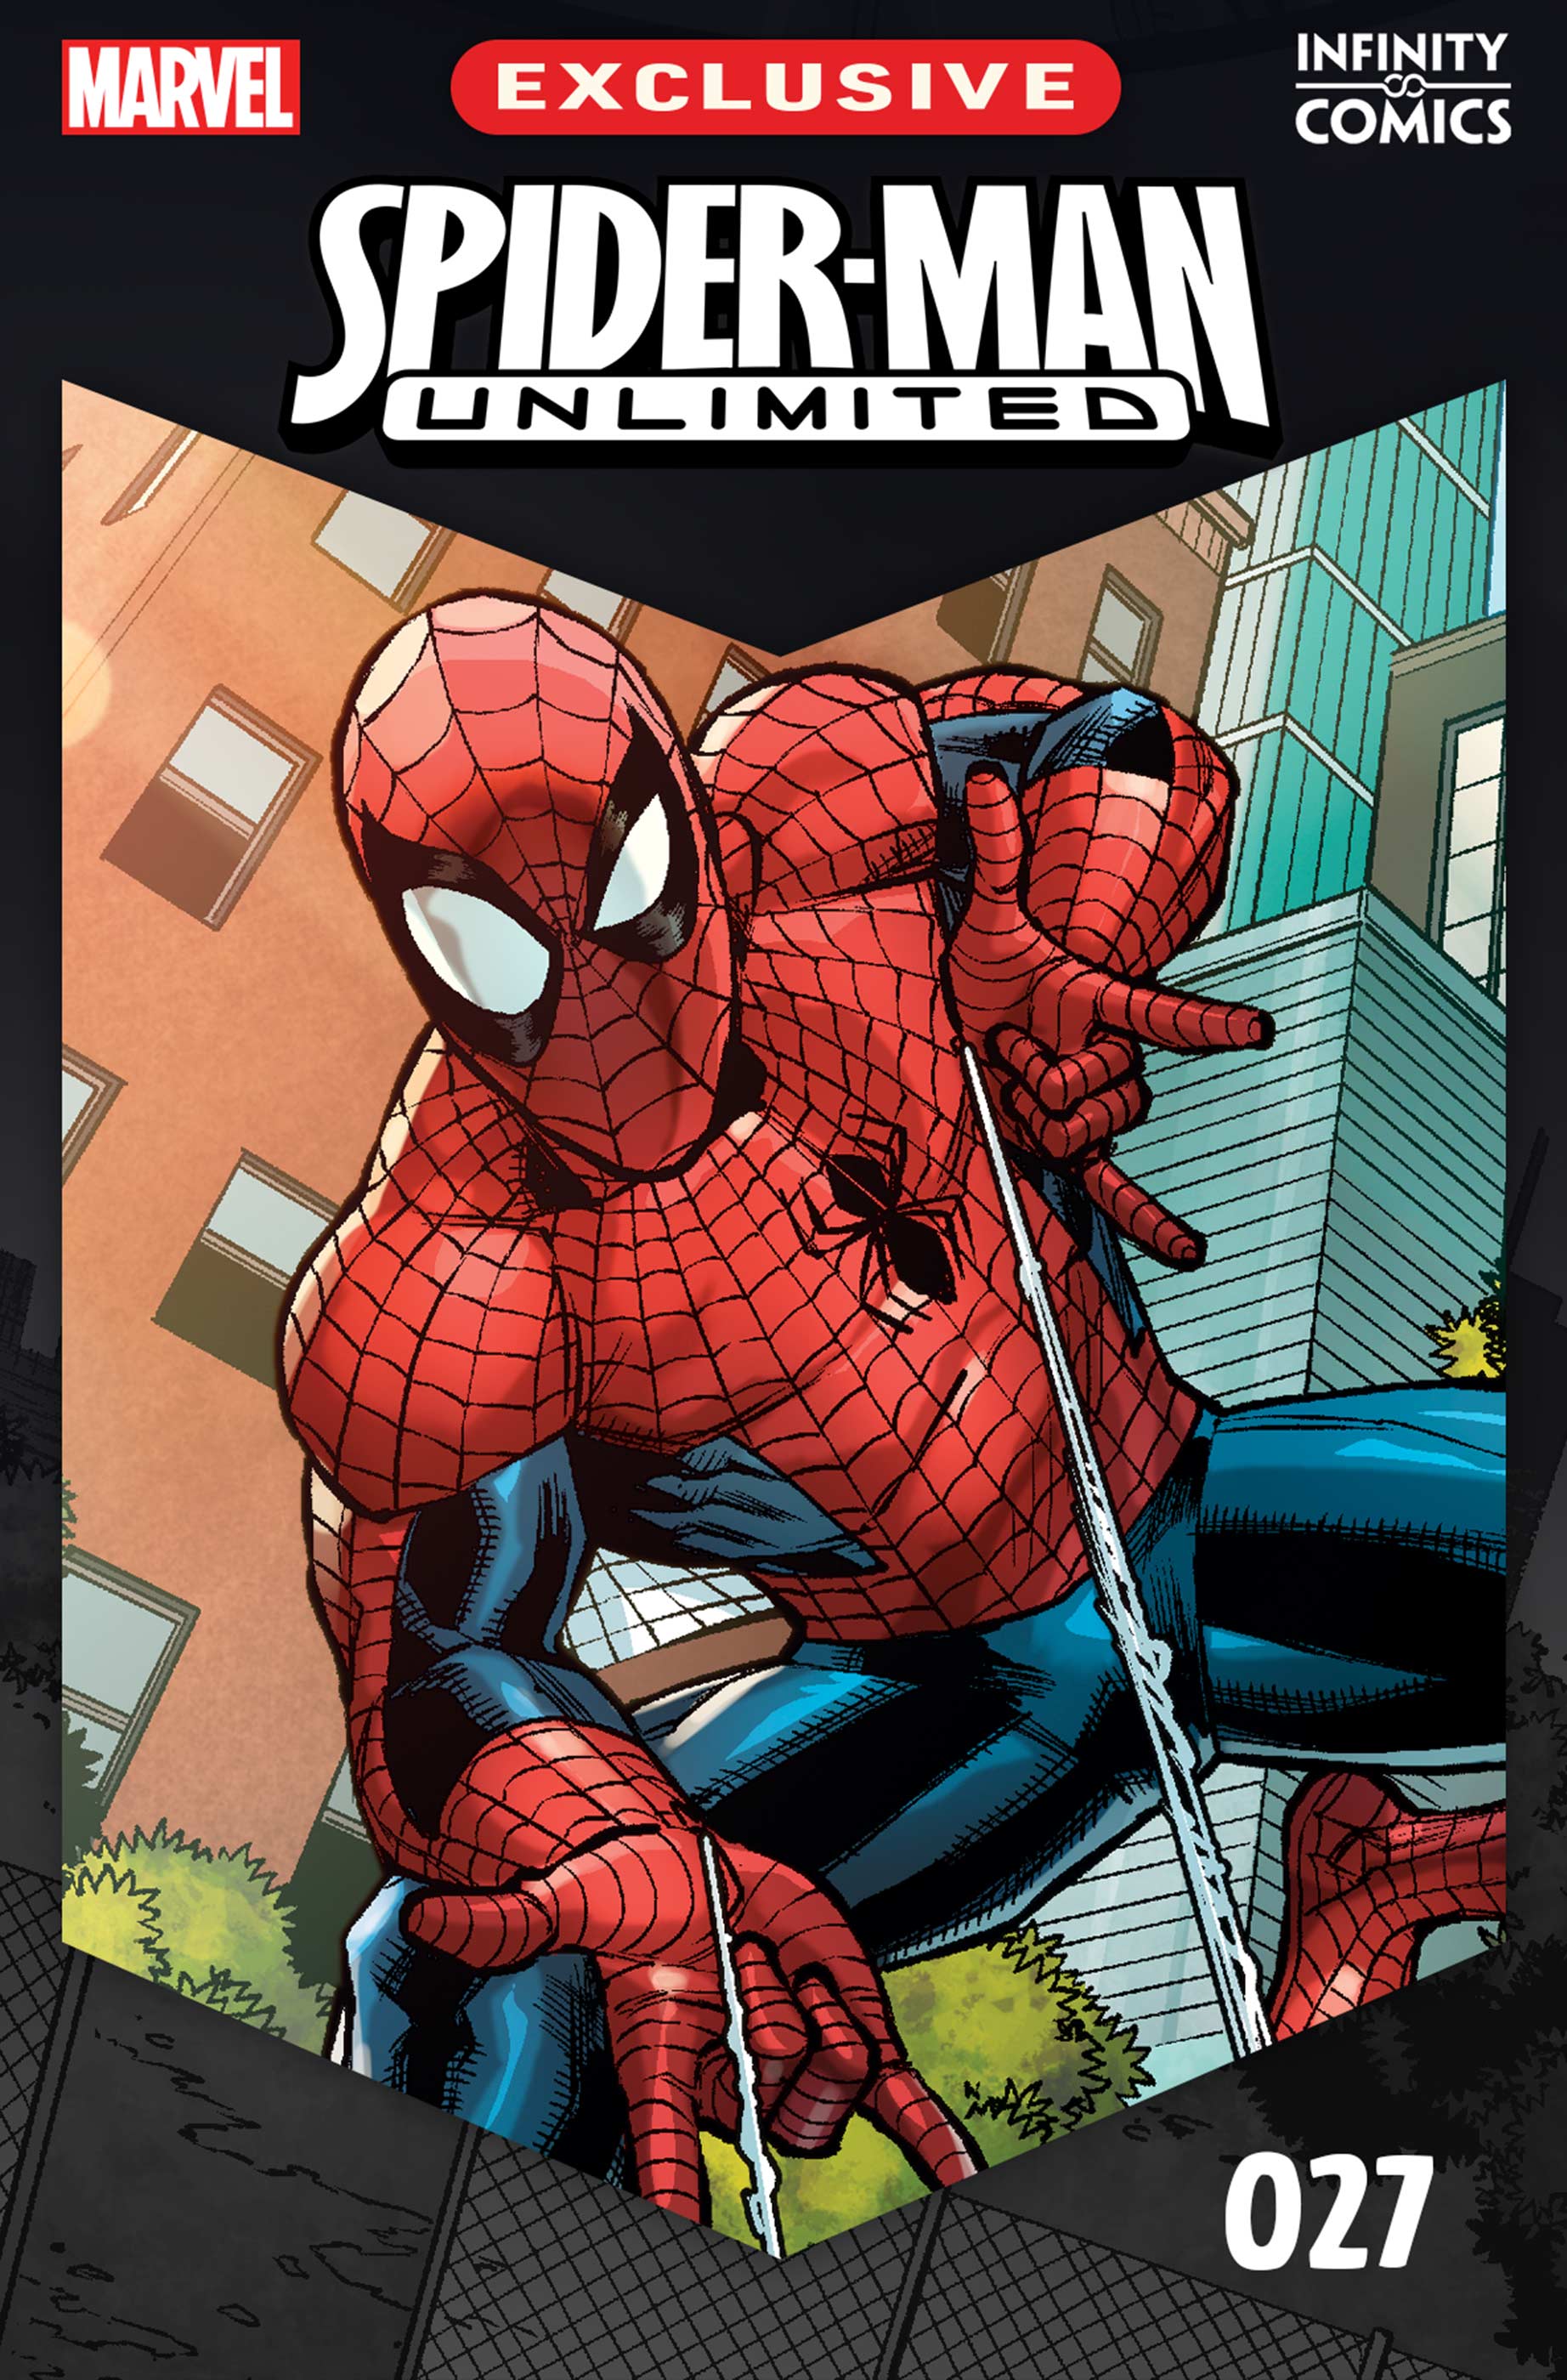 Spider-Man Unlimited Infinity Comic Vol 1 27 | Marvel Database 